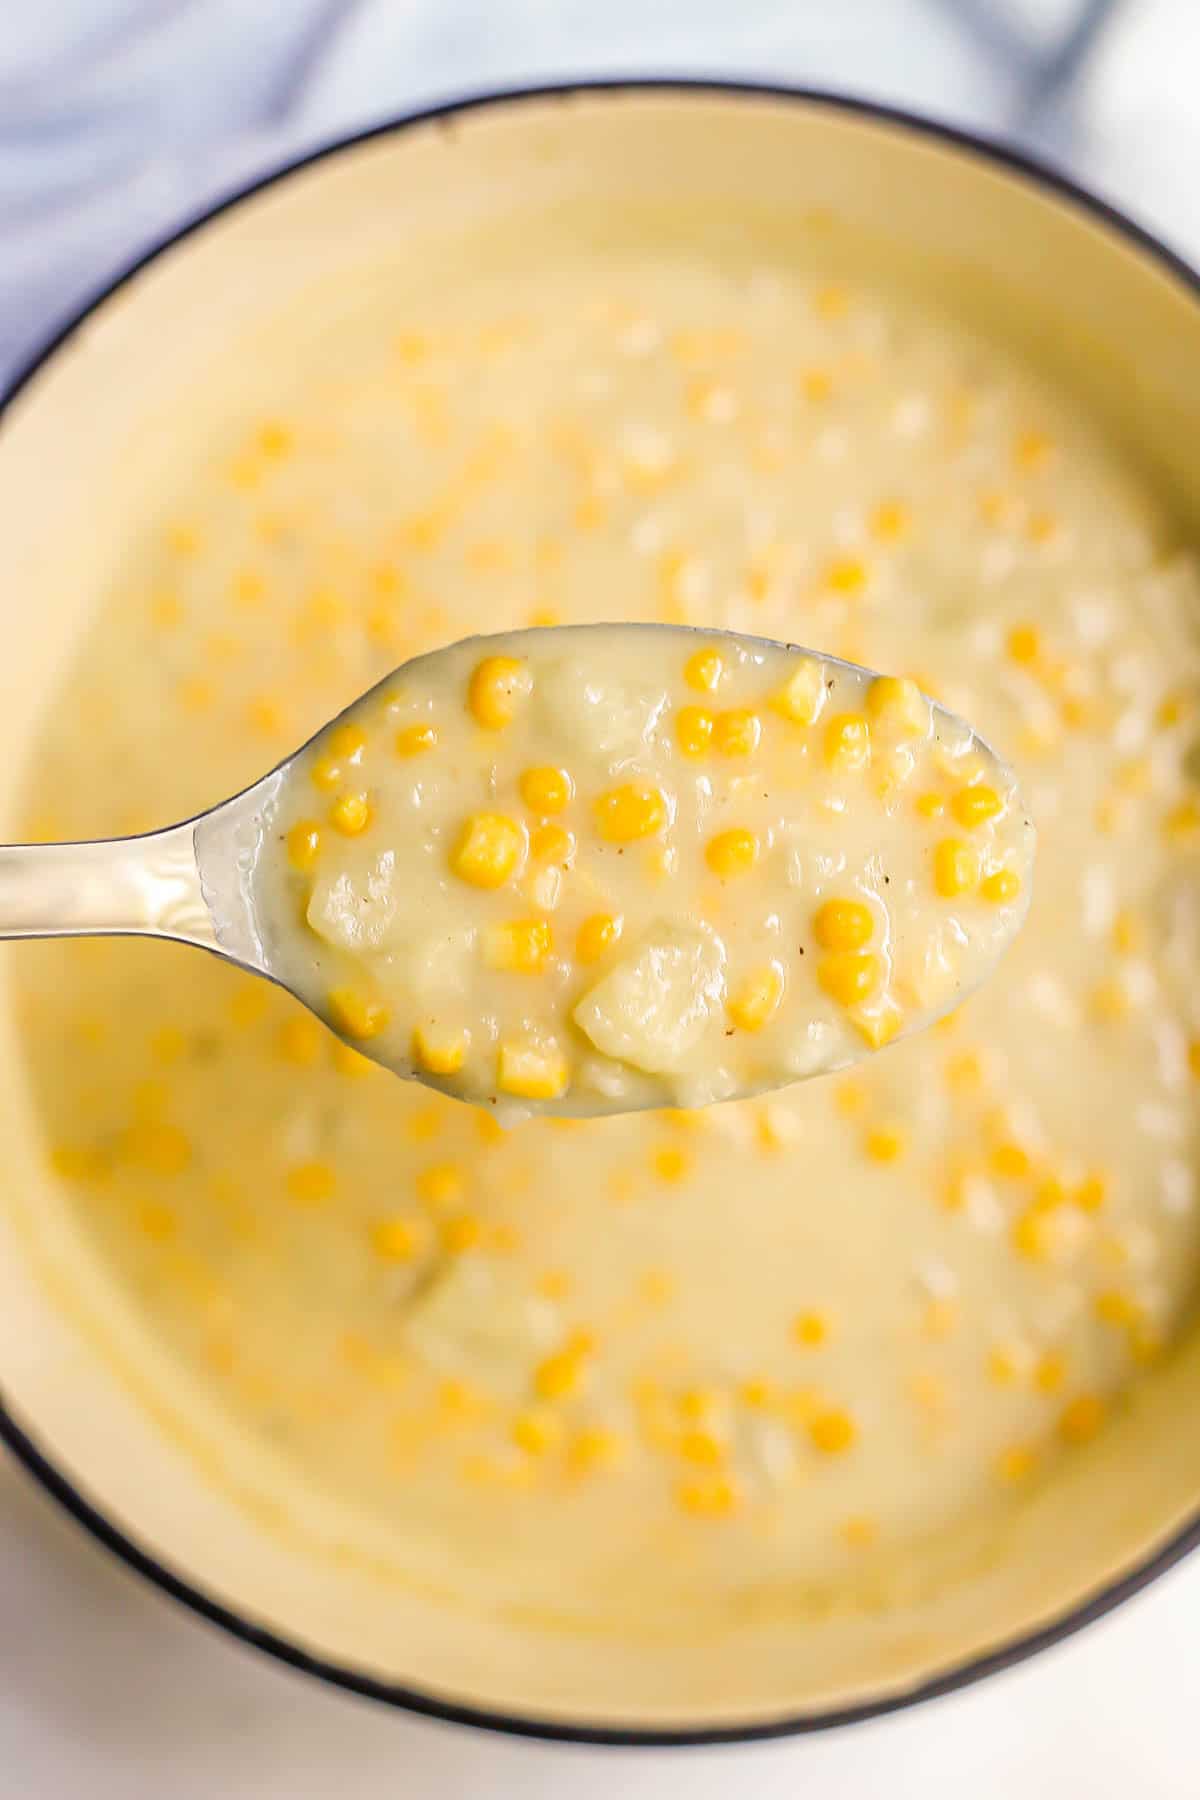 A spoon lifting up a scoop of corn chowder from a large stock pot.